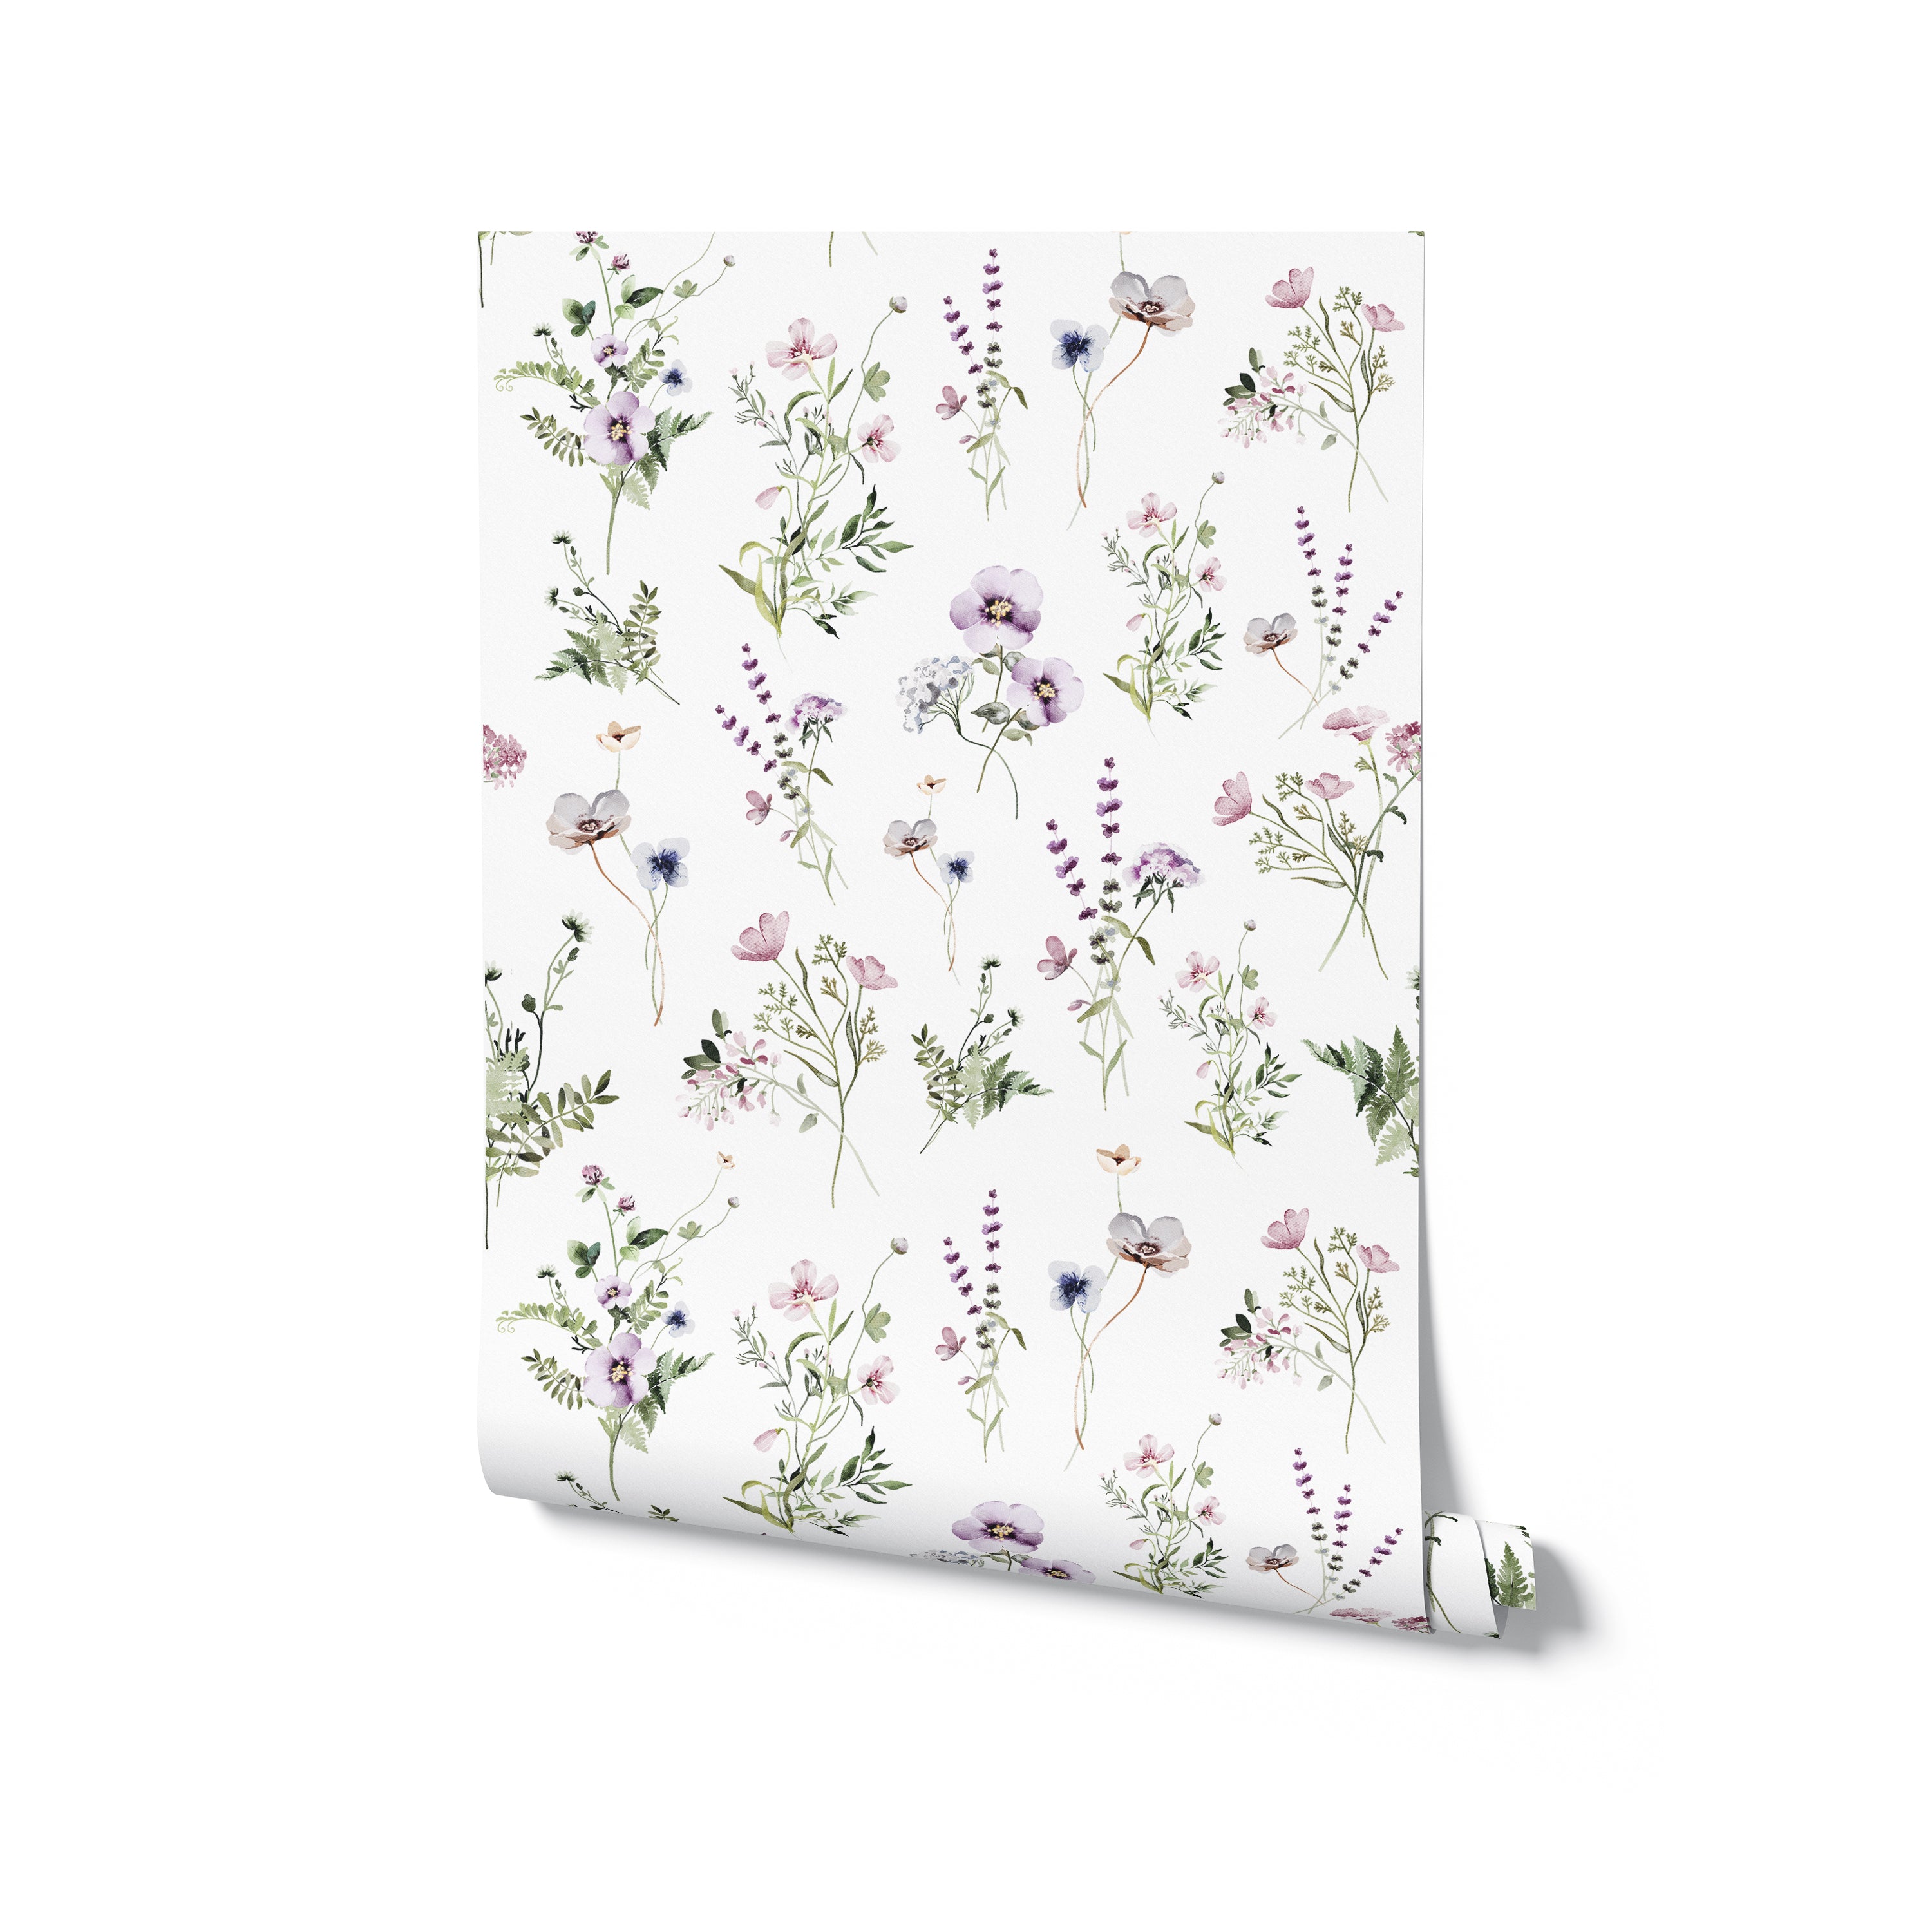 A roll of 'Midsummer Watercolour Bouquet Wallpaper - Raspberry' unfurling to reveal a detailed and colorful pattern of watercolor wildflowers and greenery, ready to add a burst of midsummer beauty to any space.